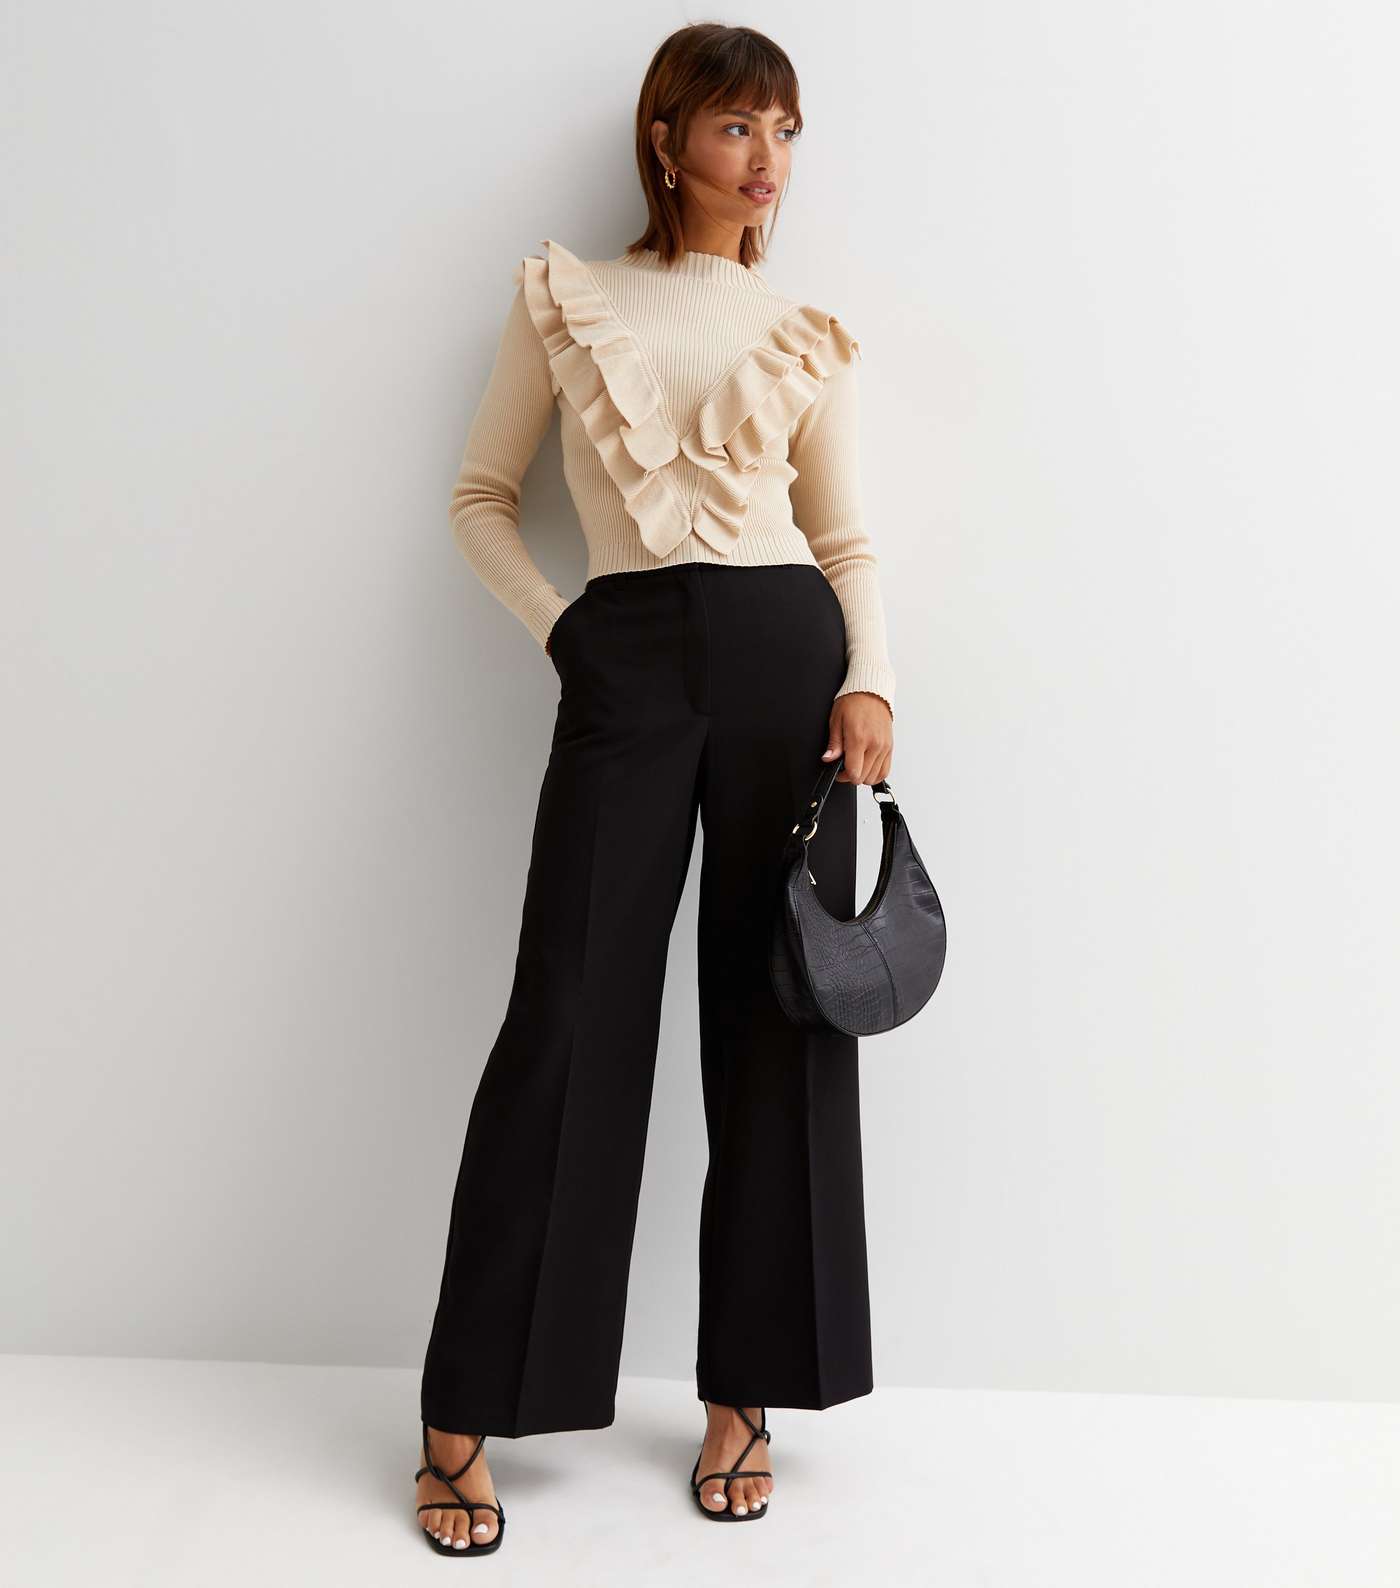 Cameo Rose Off White High Neck Ruffle Knit Jumper Image 2